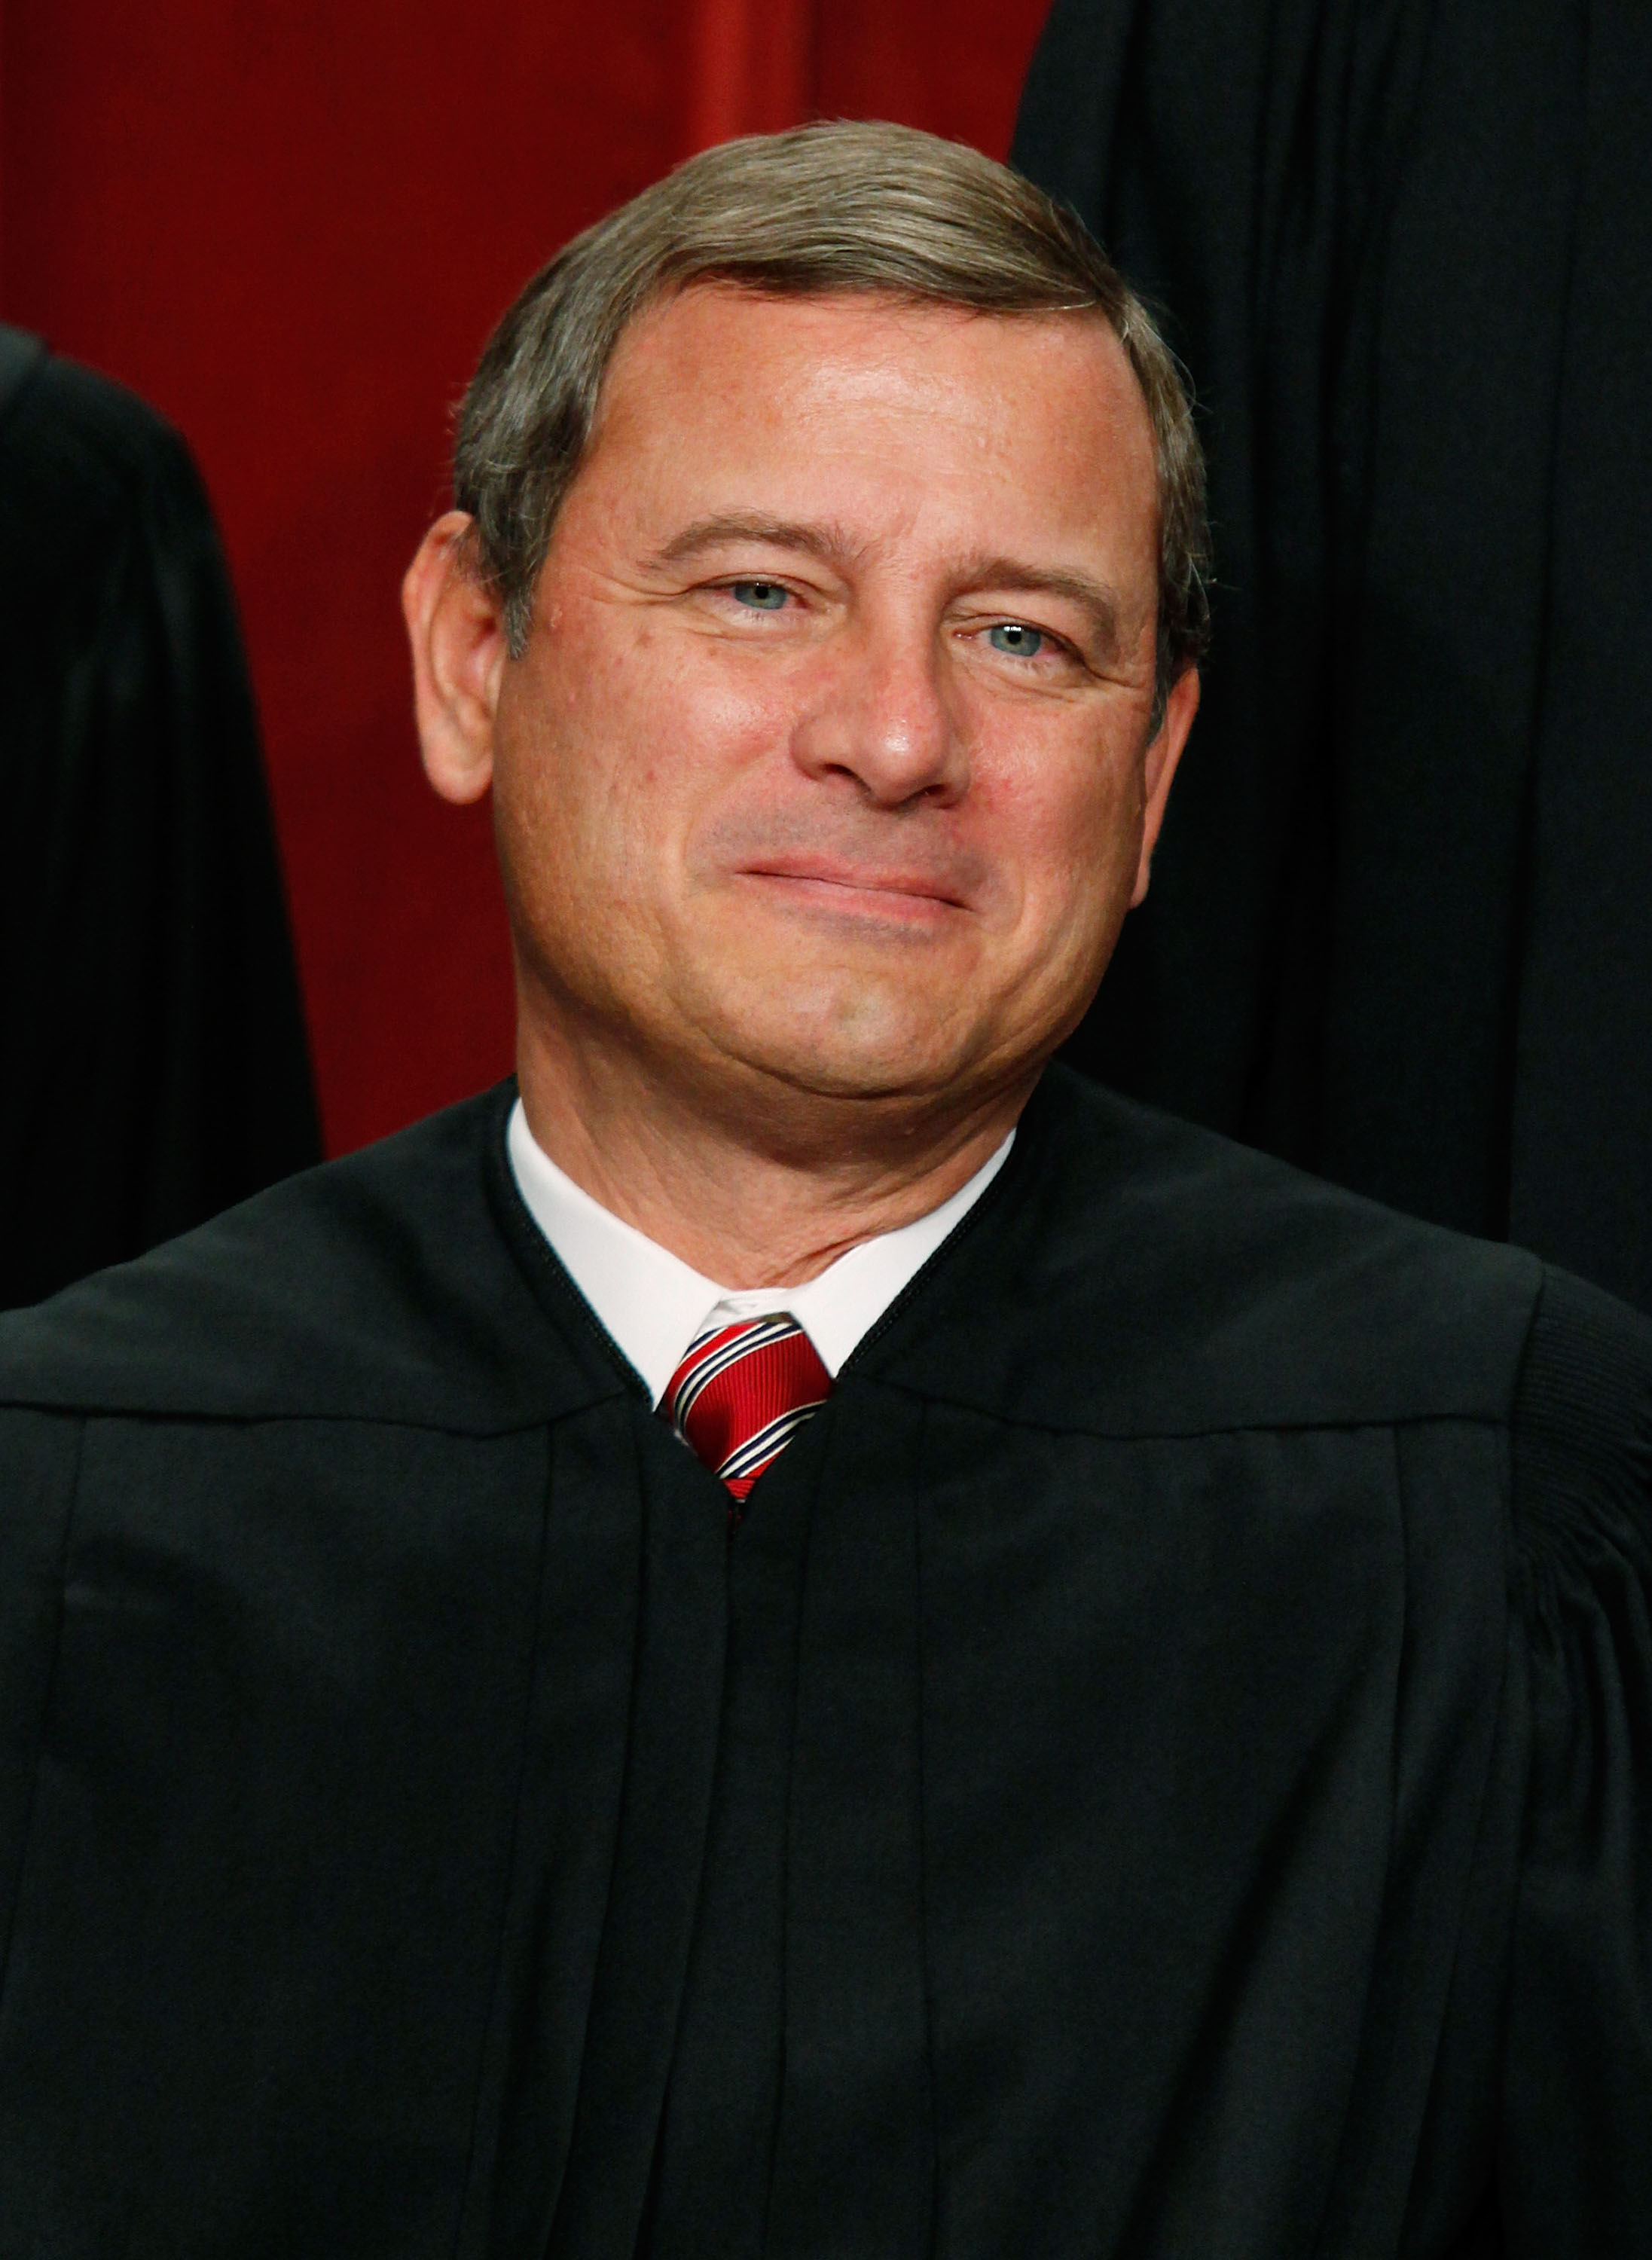 Chief Justice John G. Roberts poses for a group photograph at the Supreme Court building on Sept. 29, 2009 in Washington DC. (Mark Wilson—Getty Images)